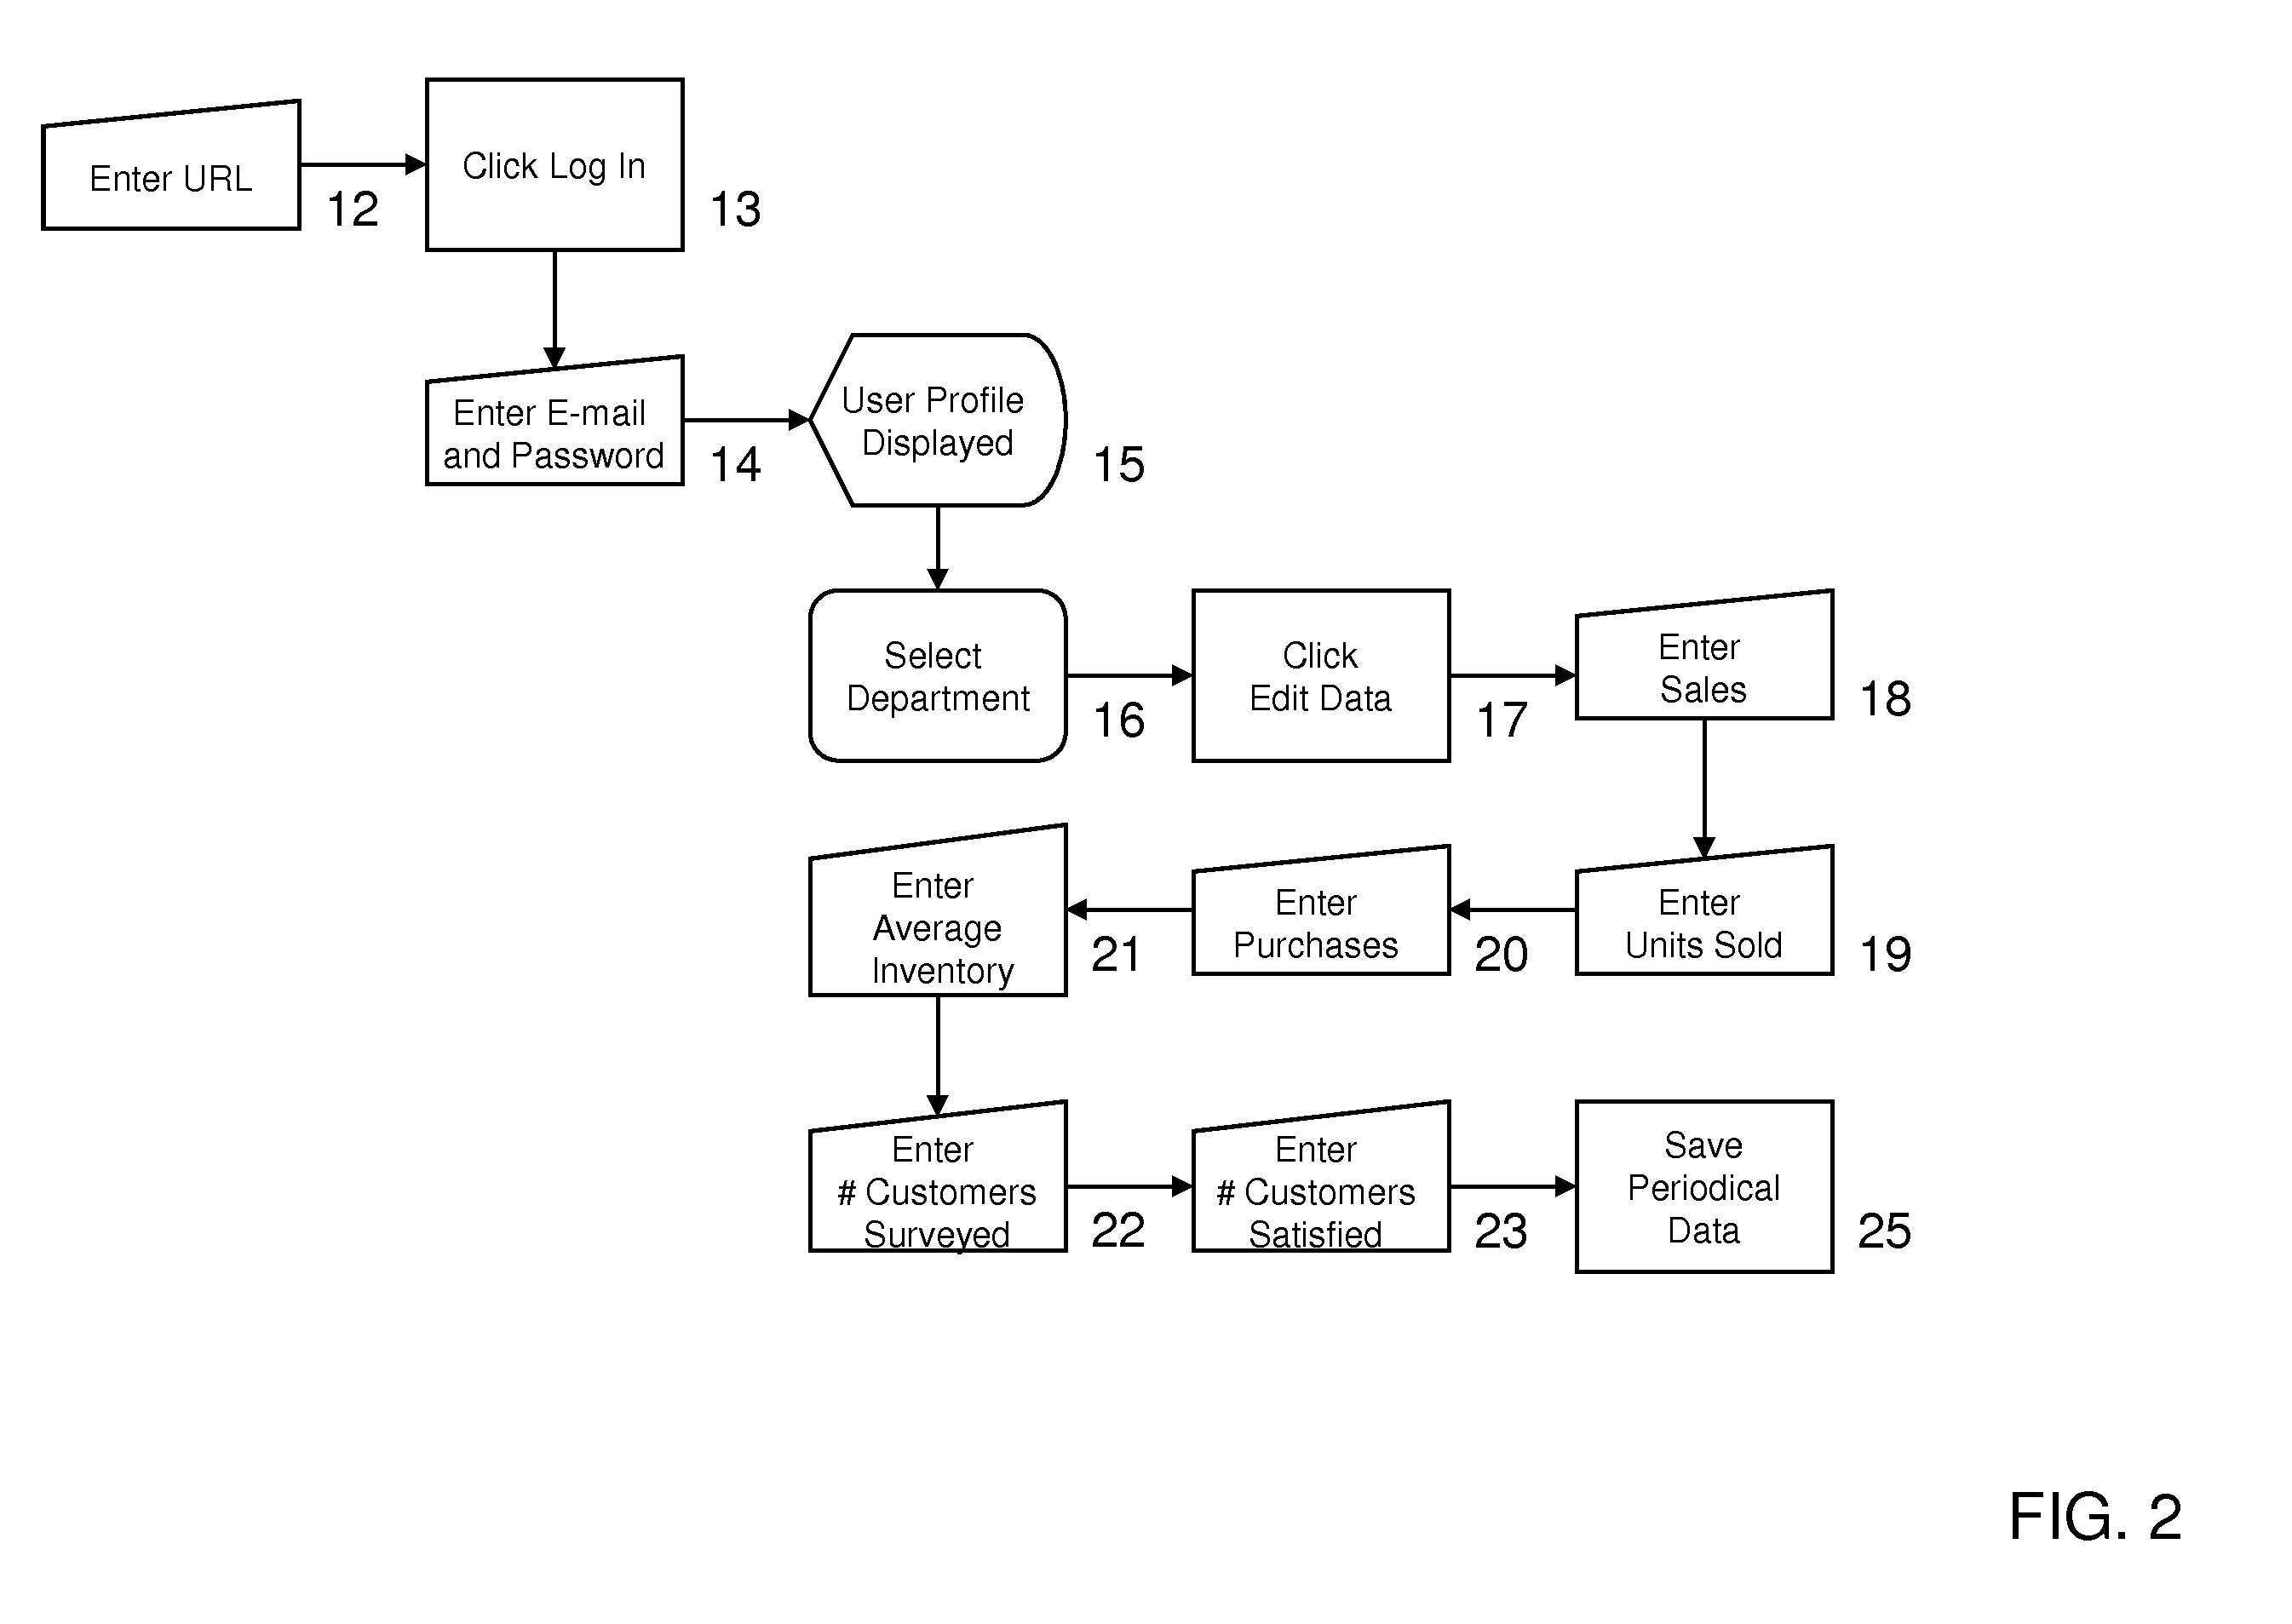 Internet-Based Benchmarking System and Method for Evaluating and Comparing Businesses Using Metrics